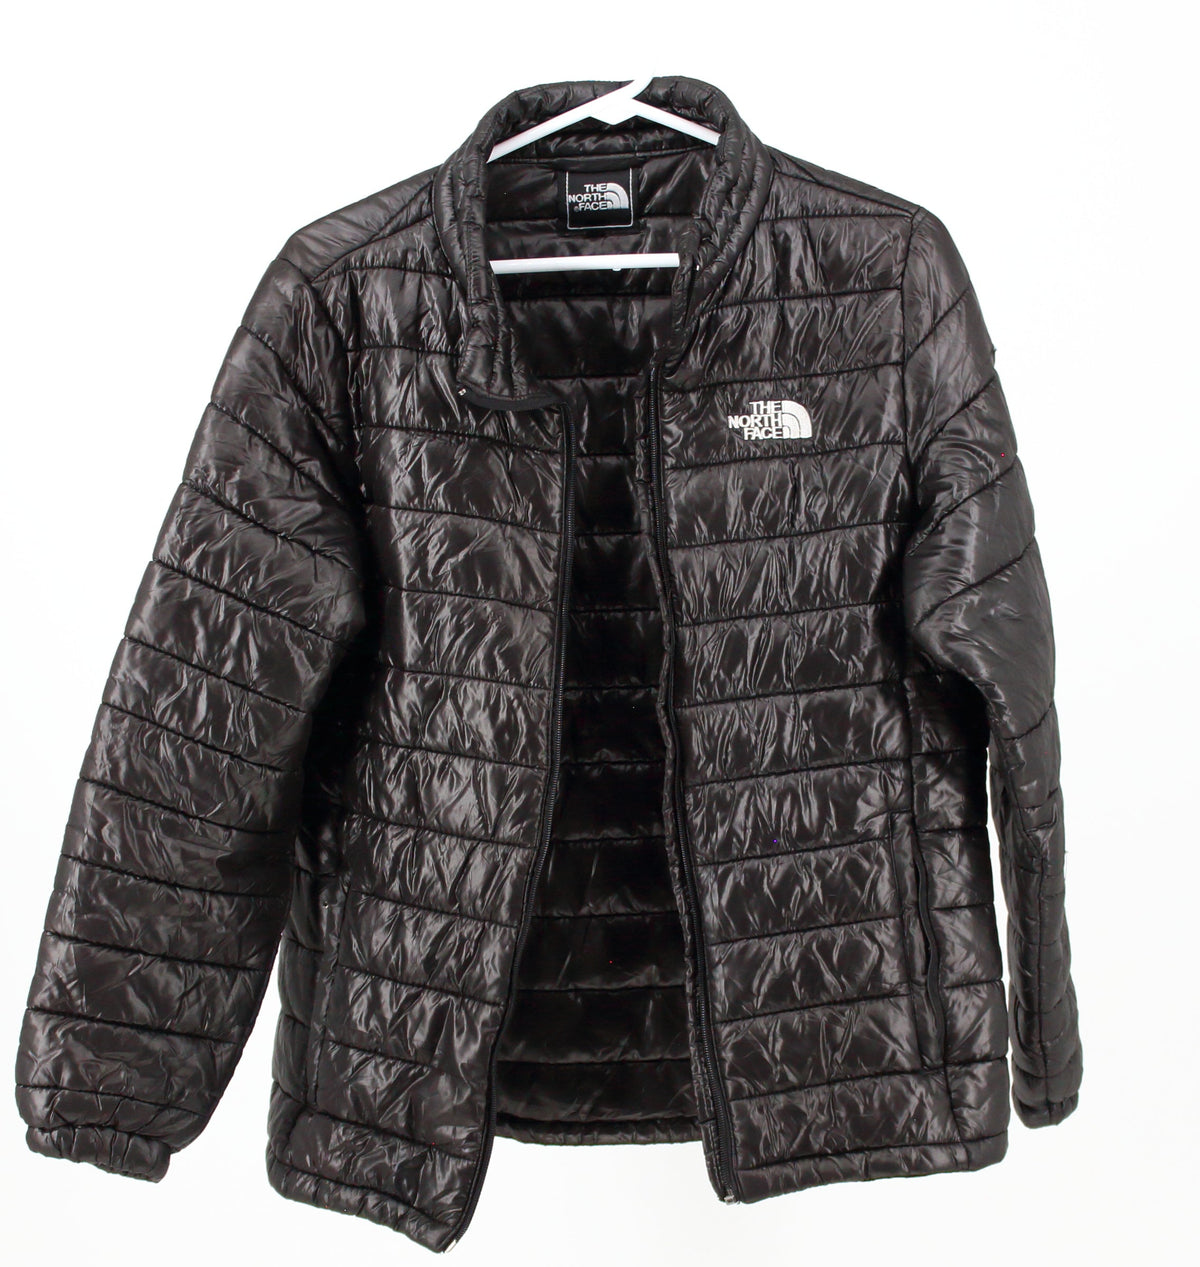 The North Face Black Bubble Jacket